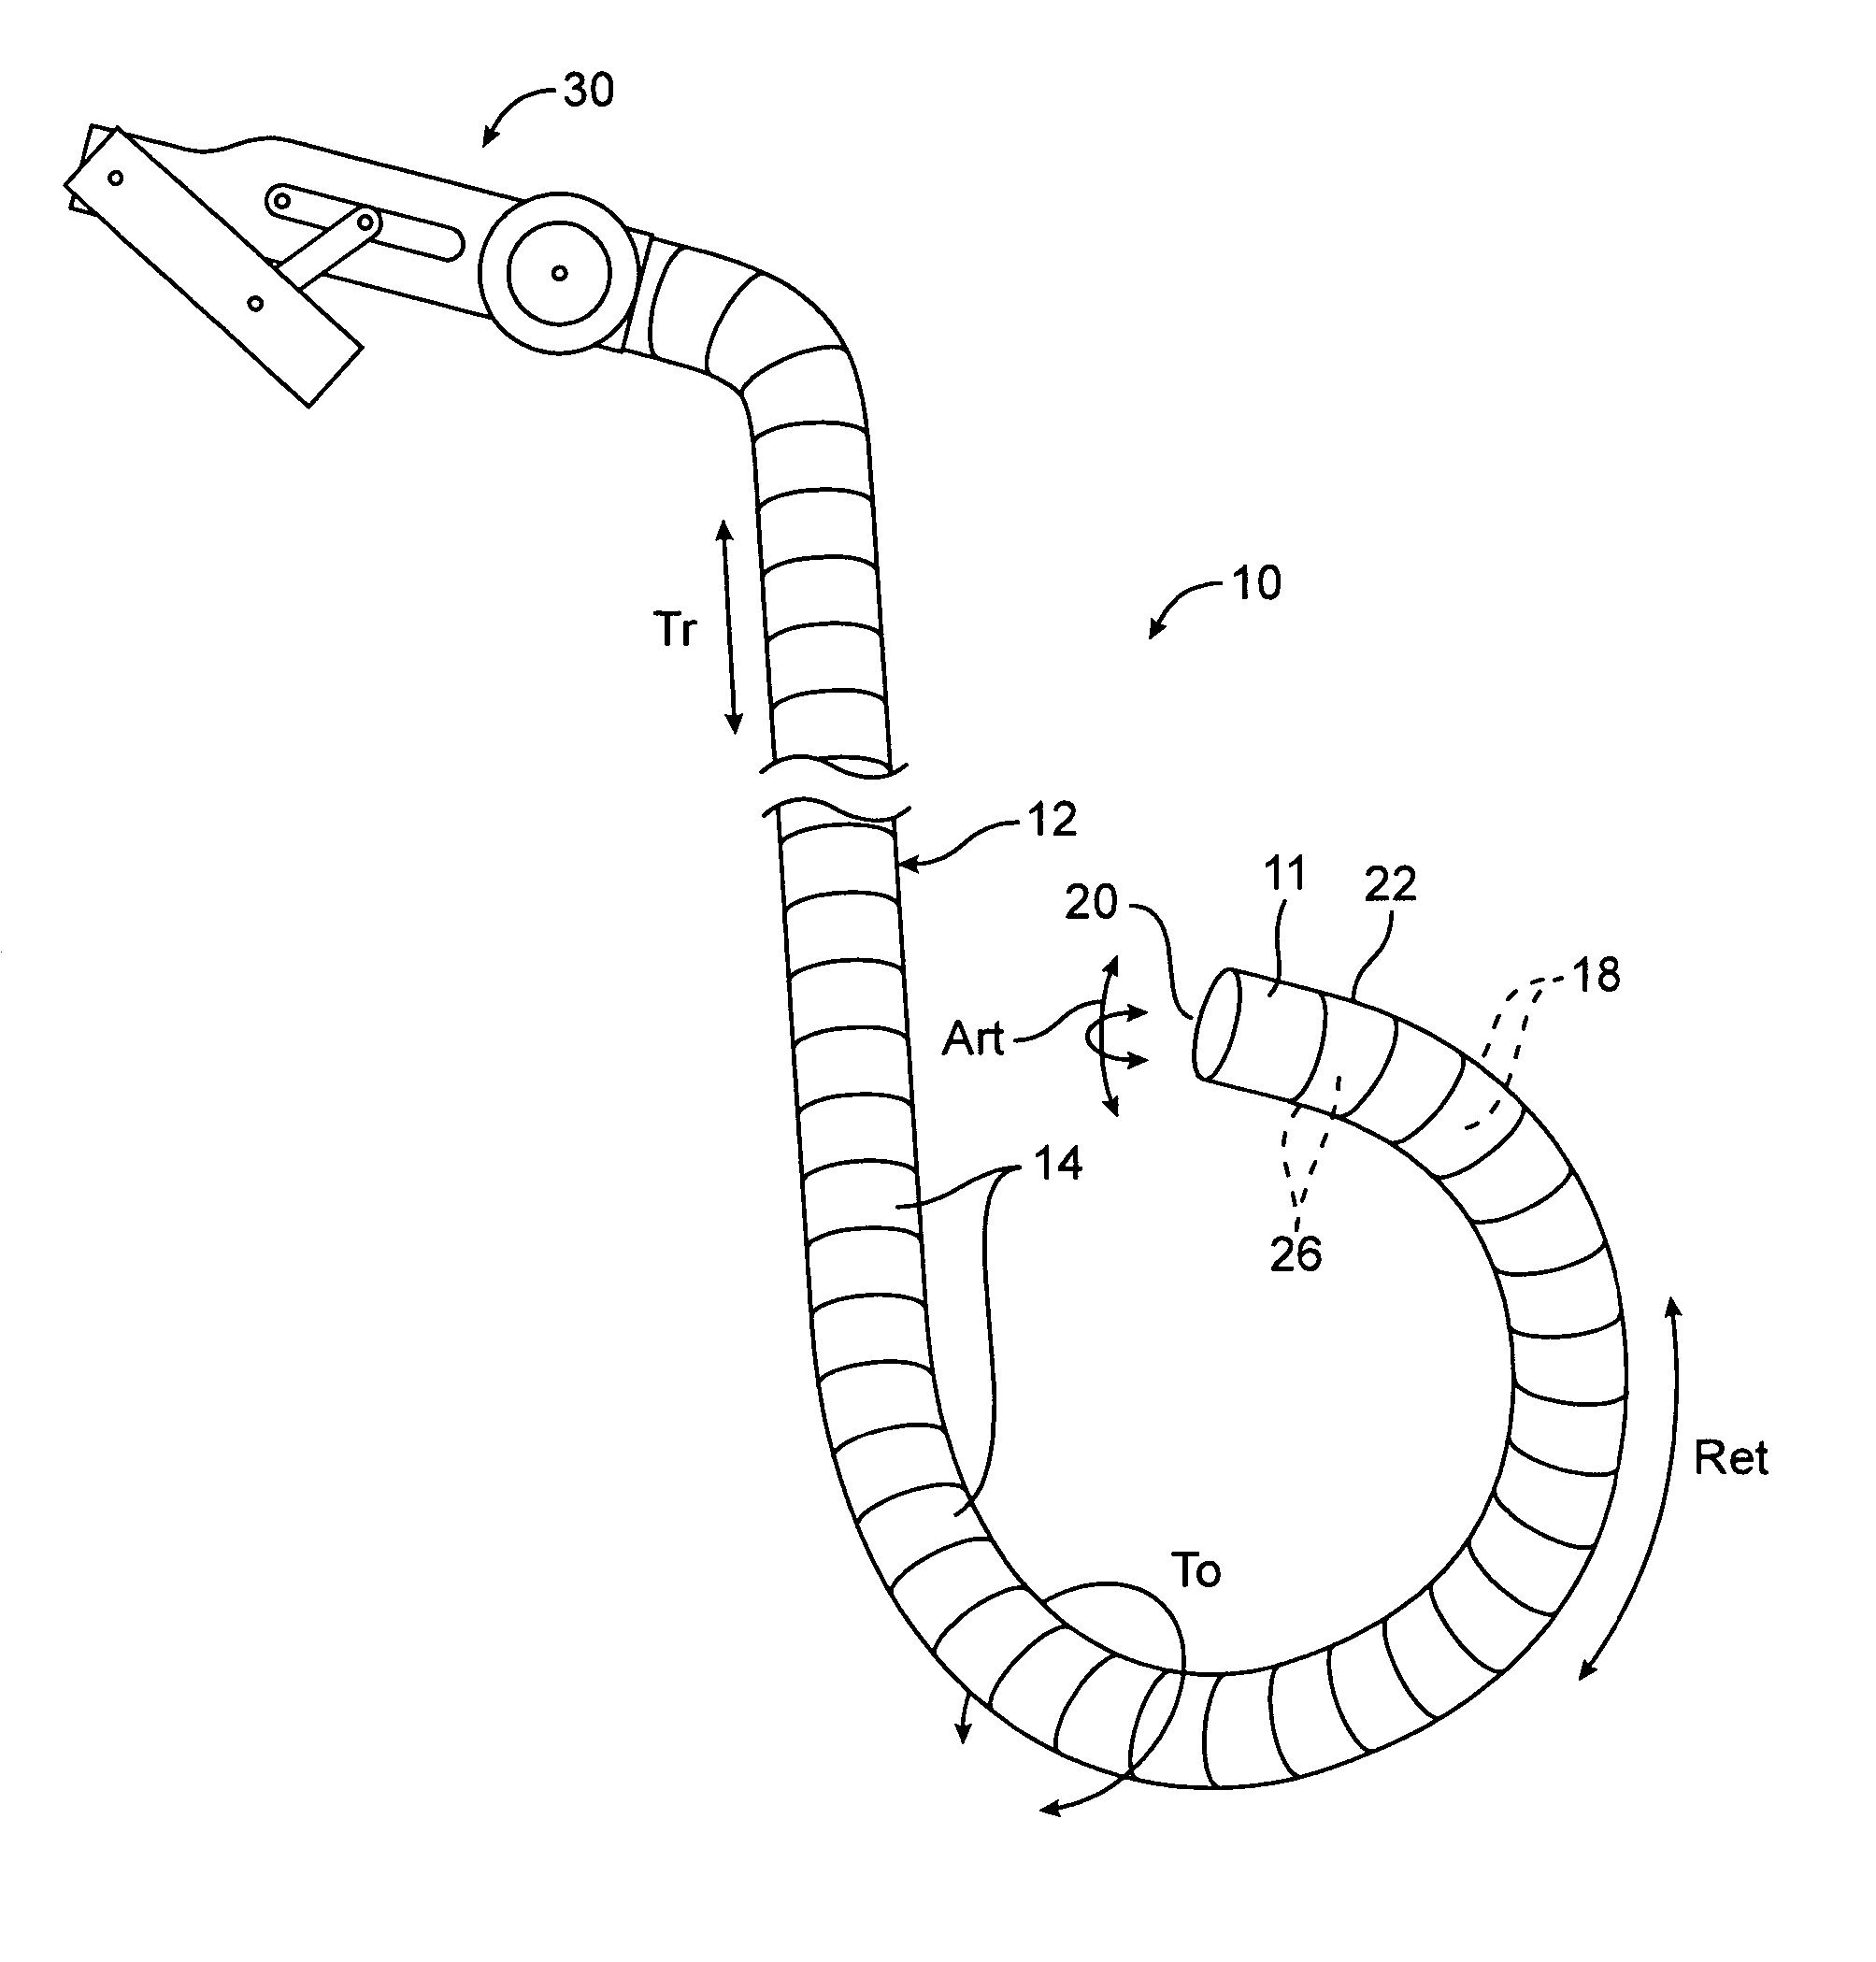 Apparatus and methods for obtaining endoluminal access with a steerable guide having a variable pivot